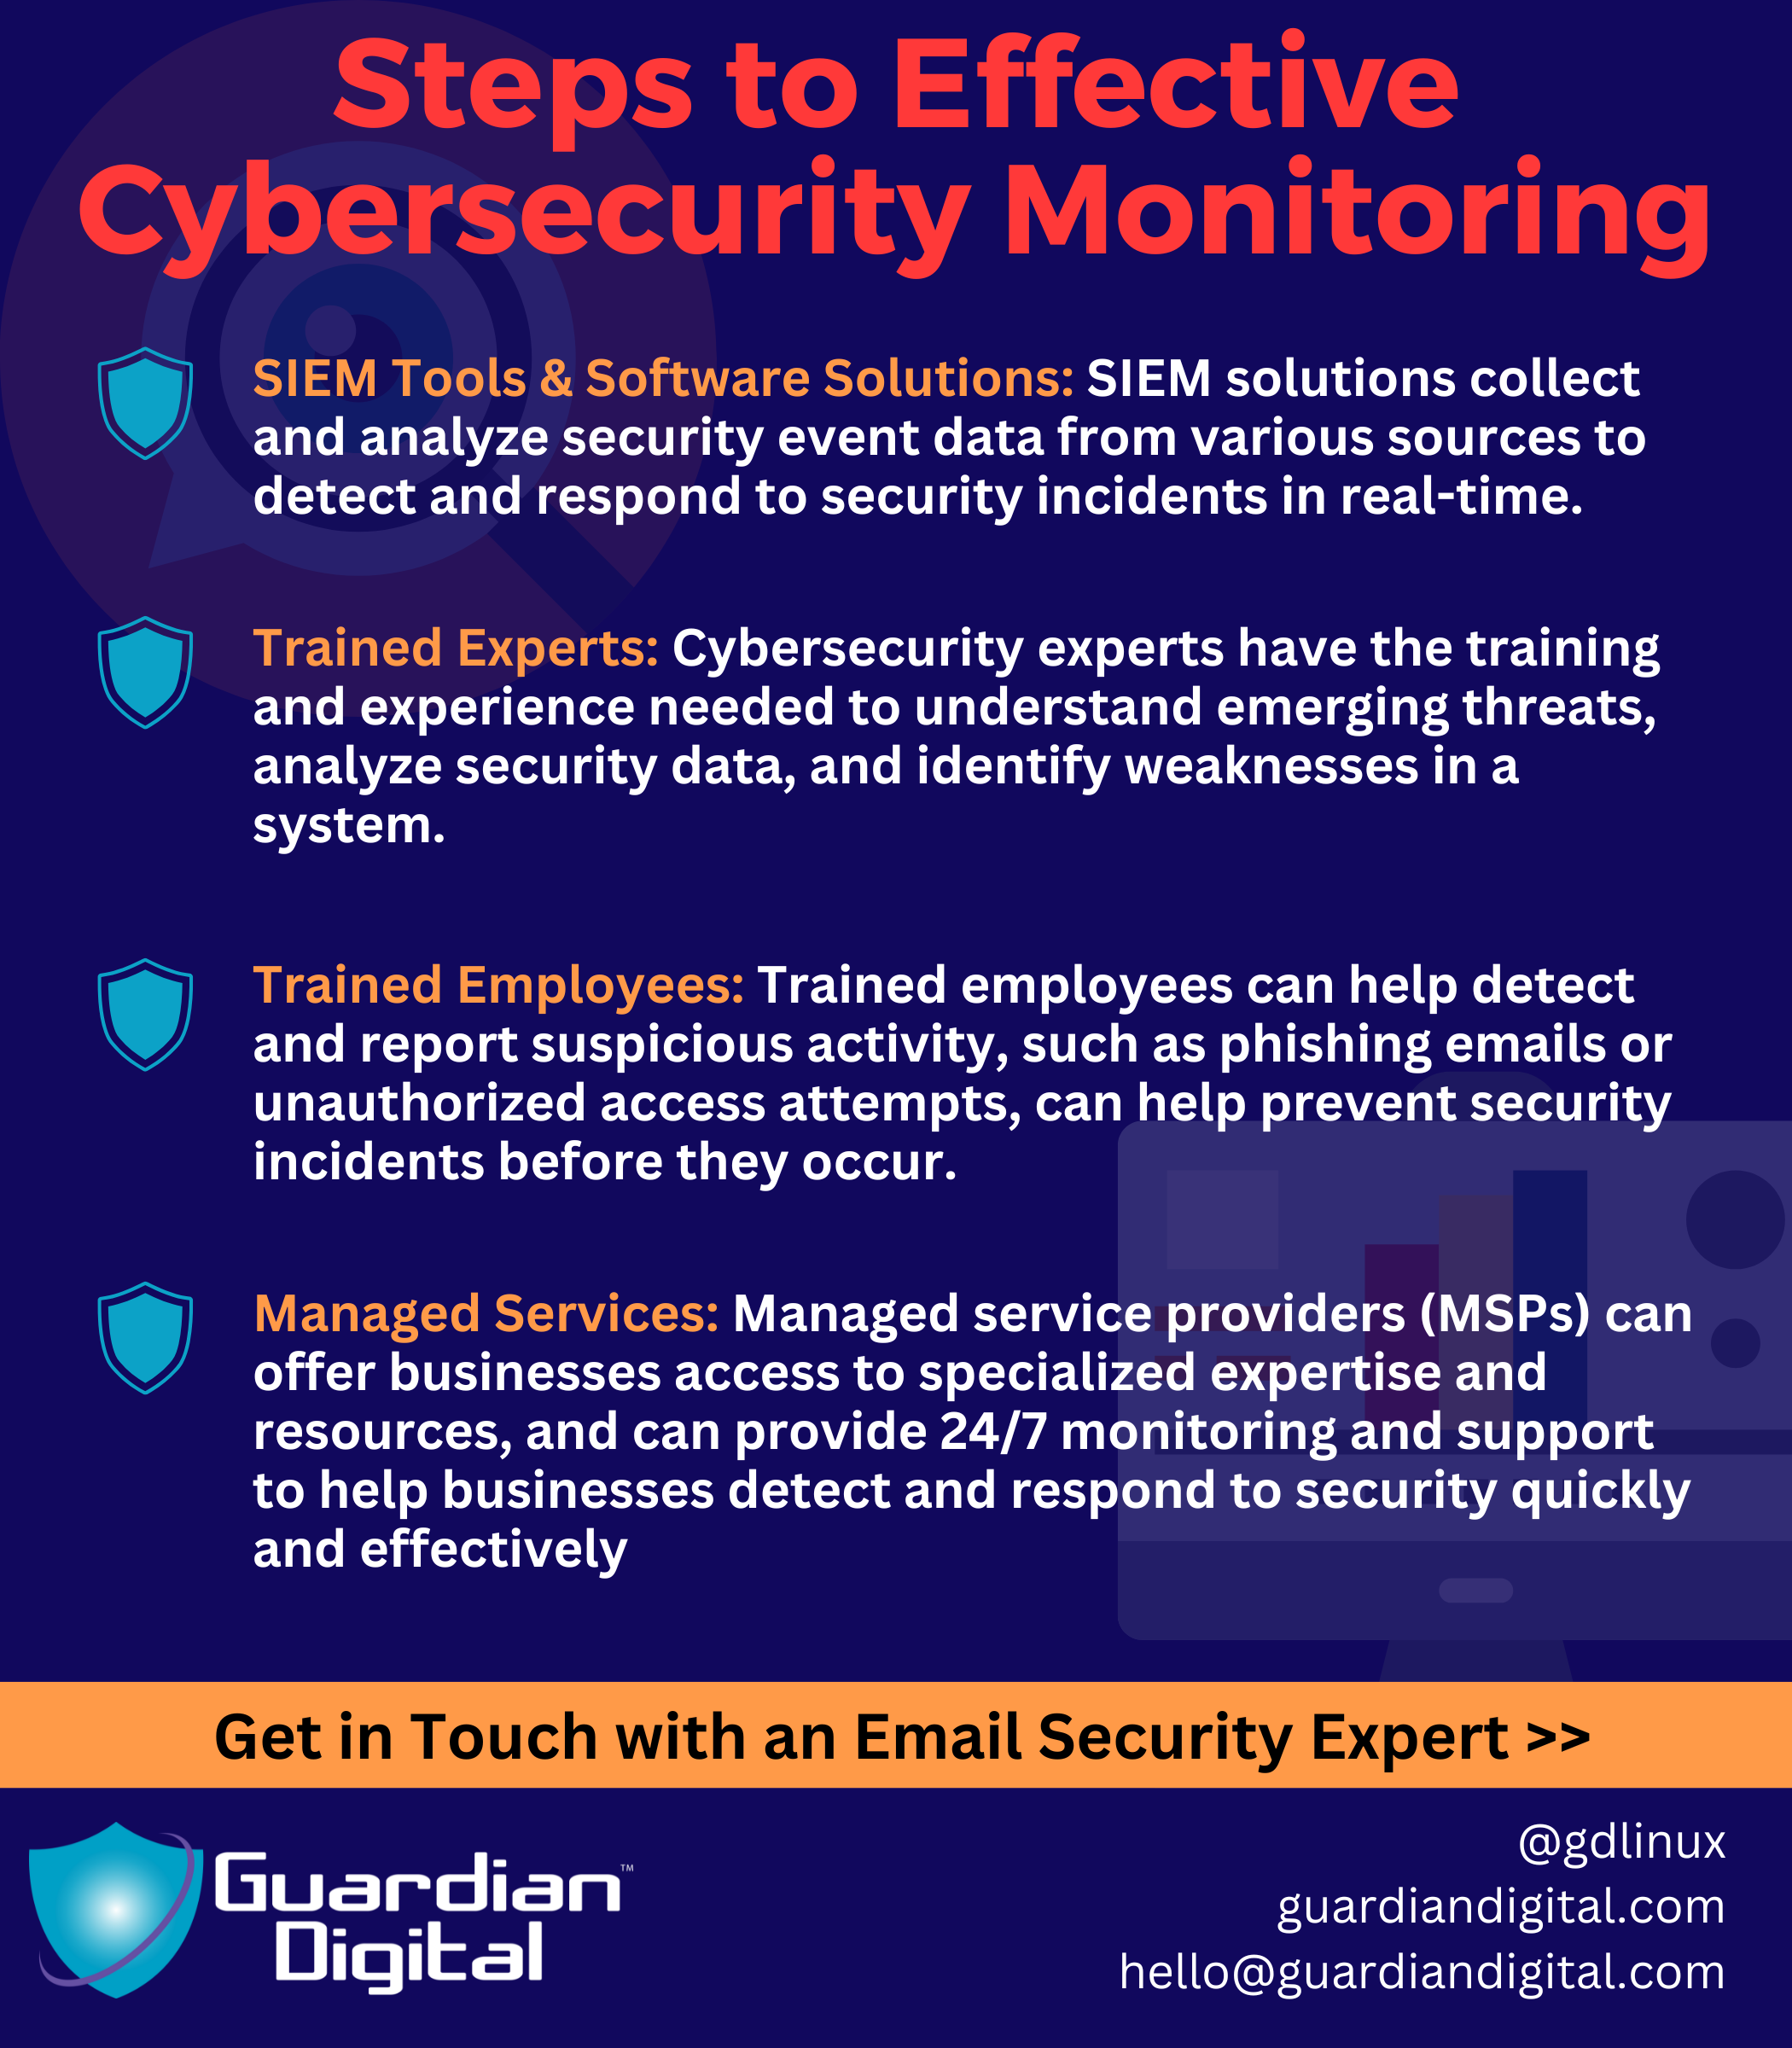 Steps to Effective Cybersecurity Monitoring